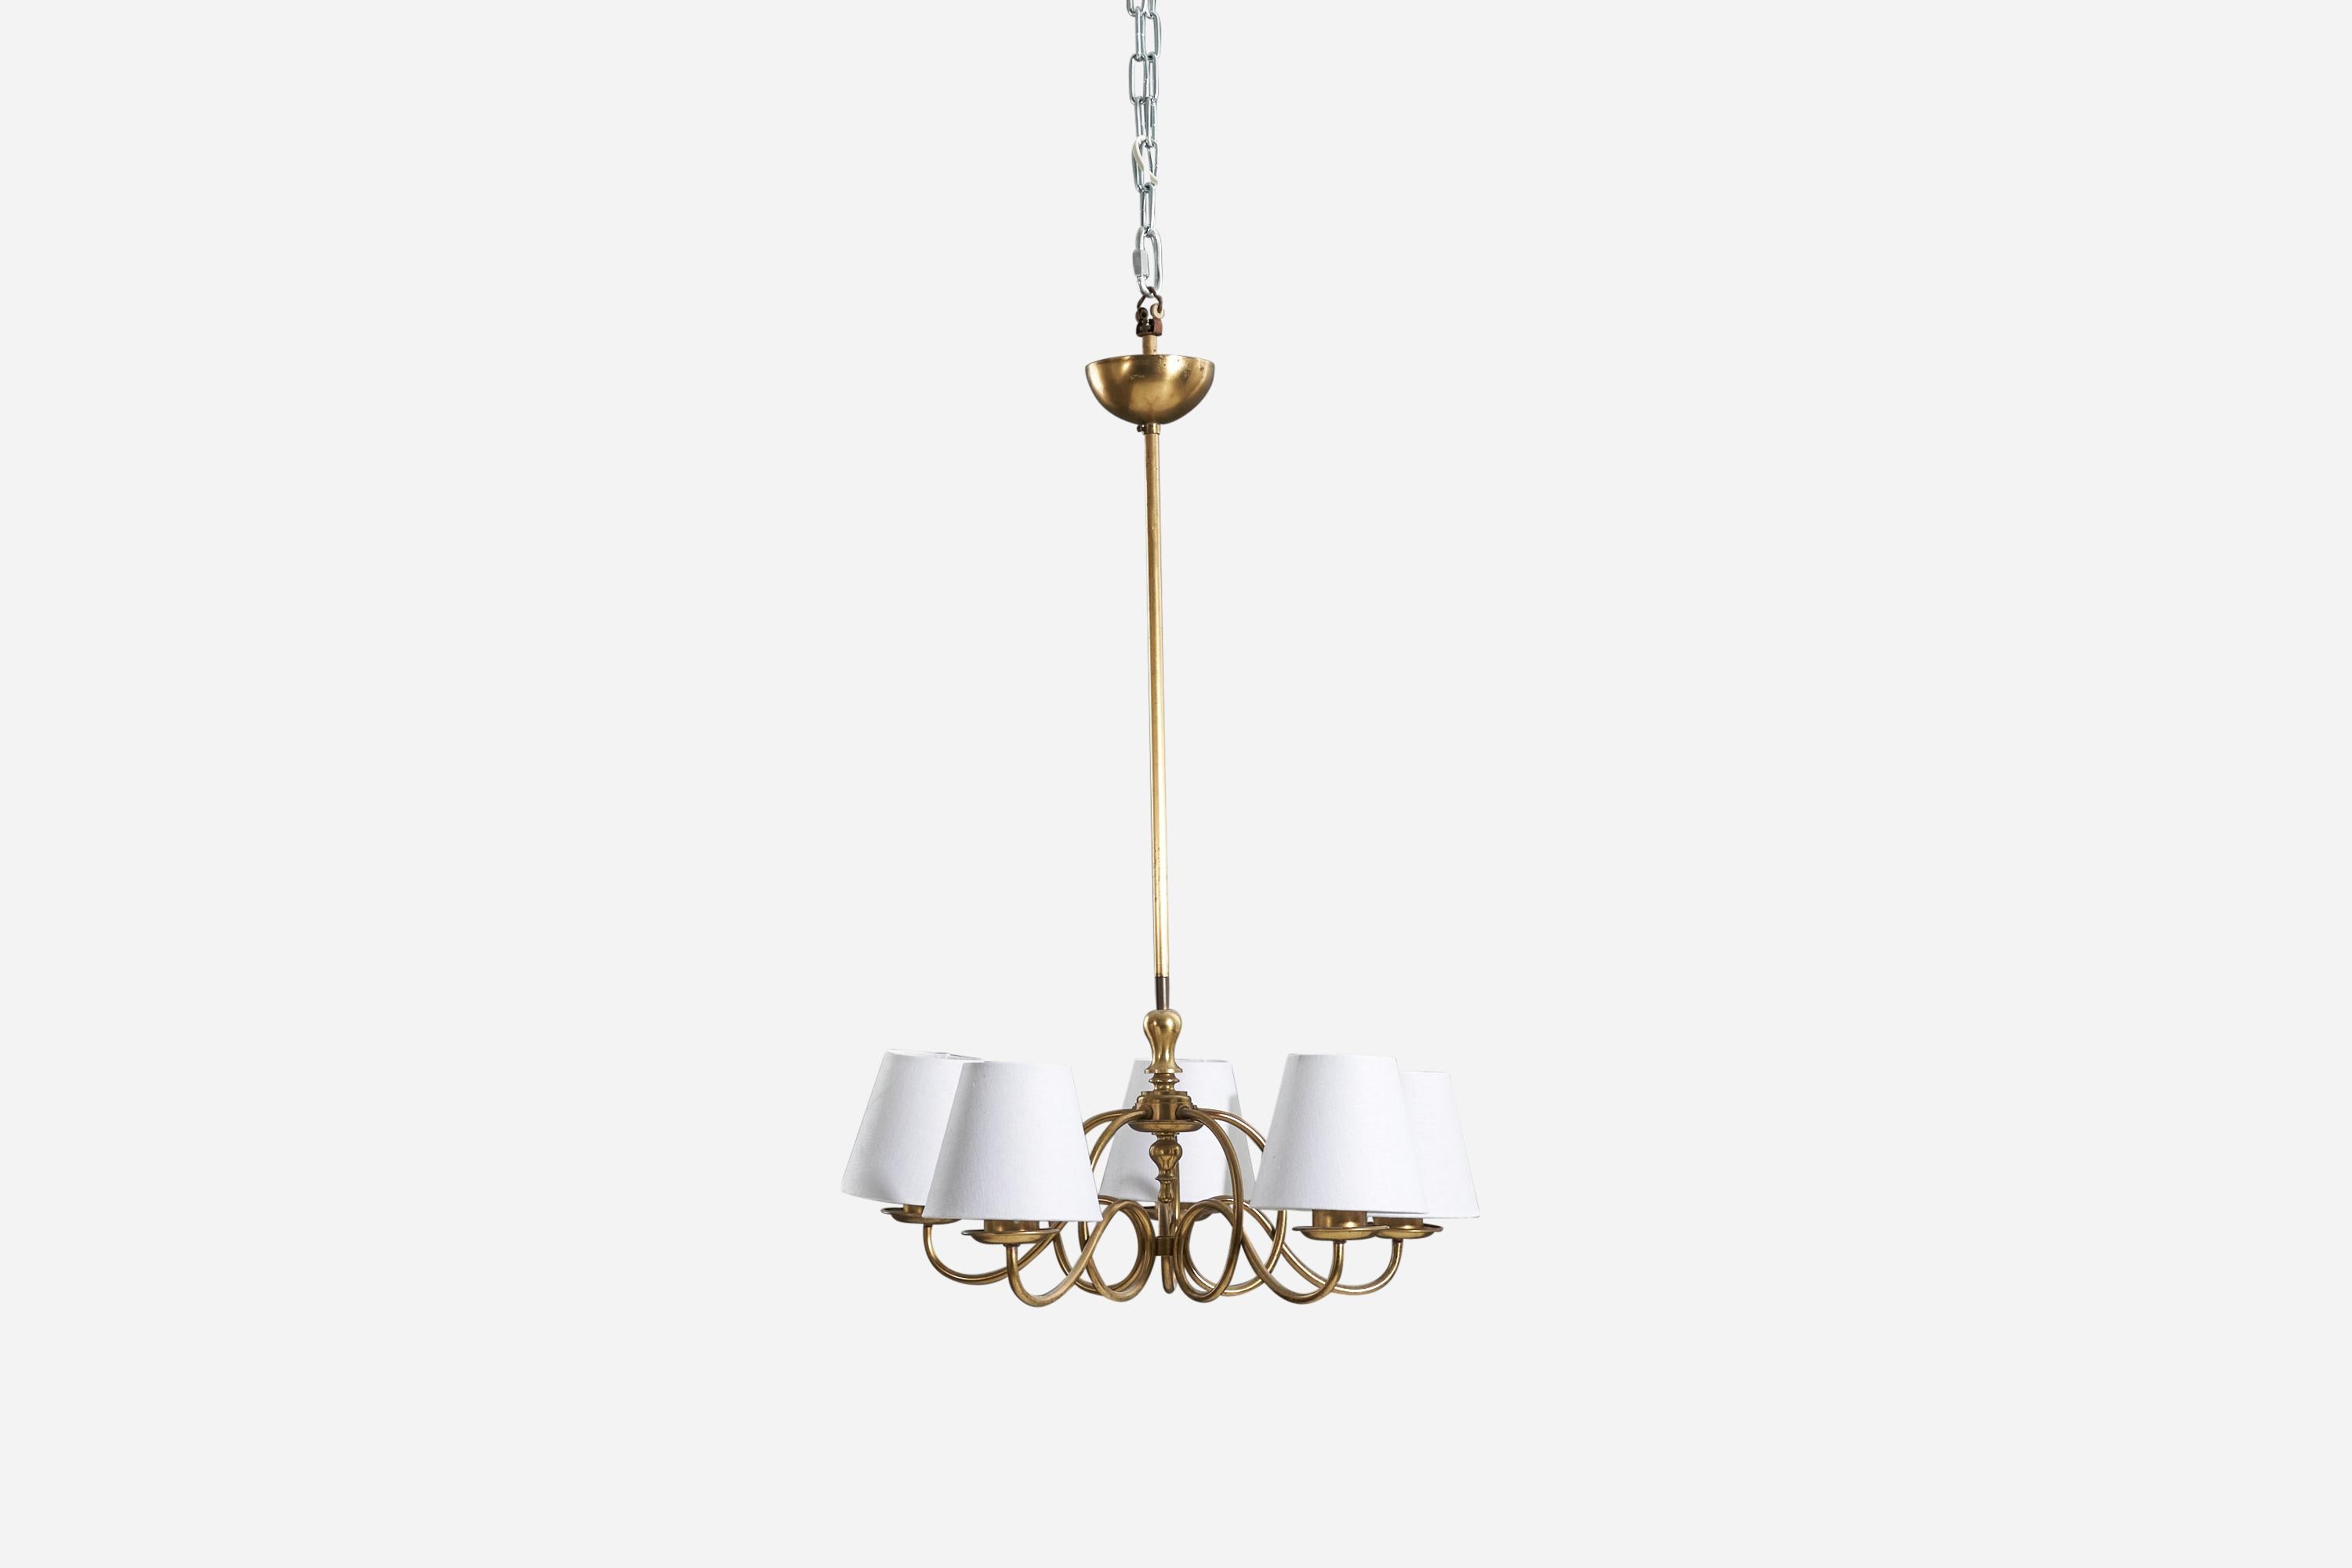 Mid-20th Century Swedish Designer, Five-Armed Chandelier, Brass, White Fabric, Sweden, 1940s For Sale